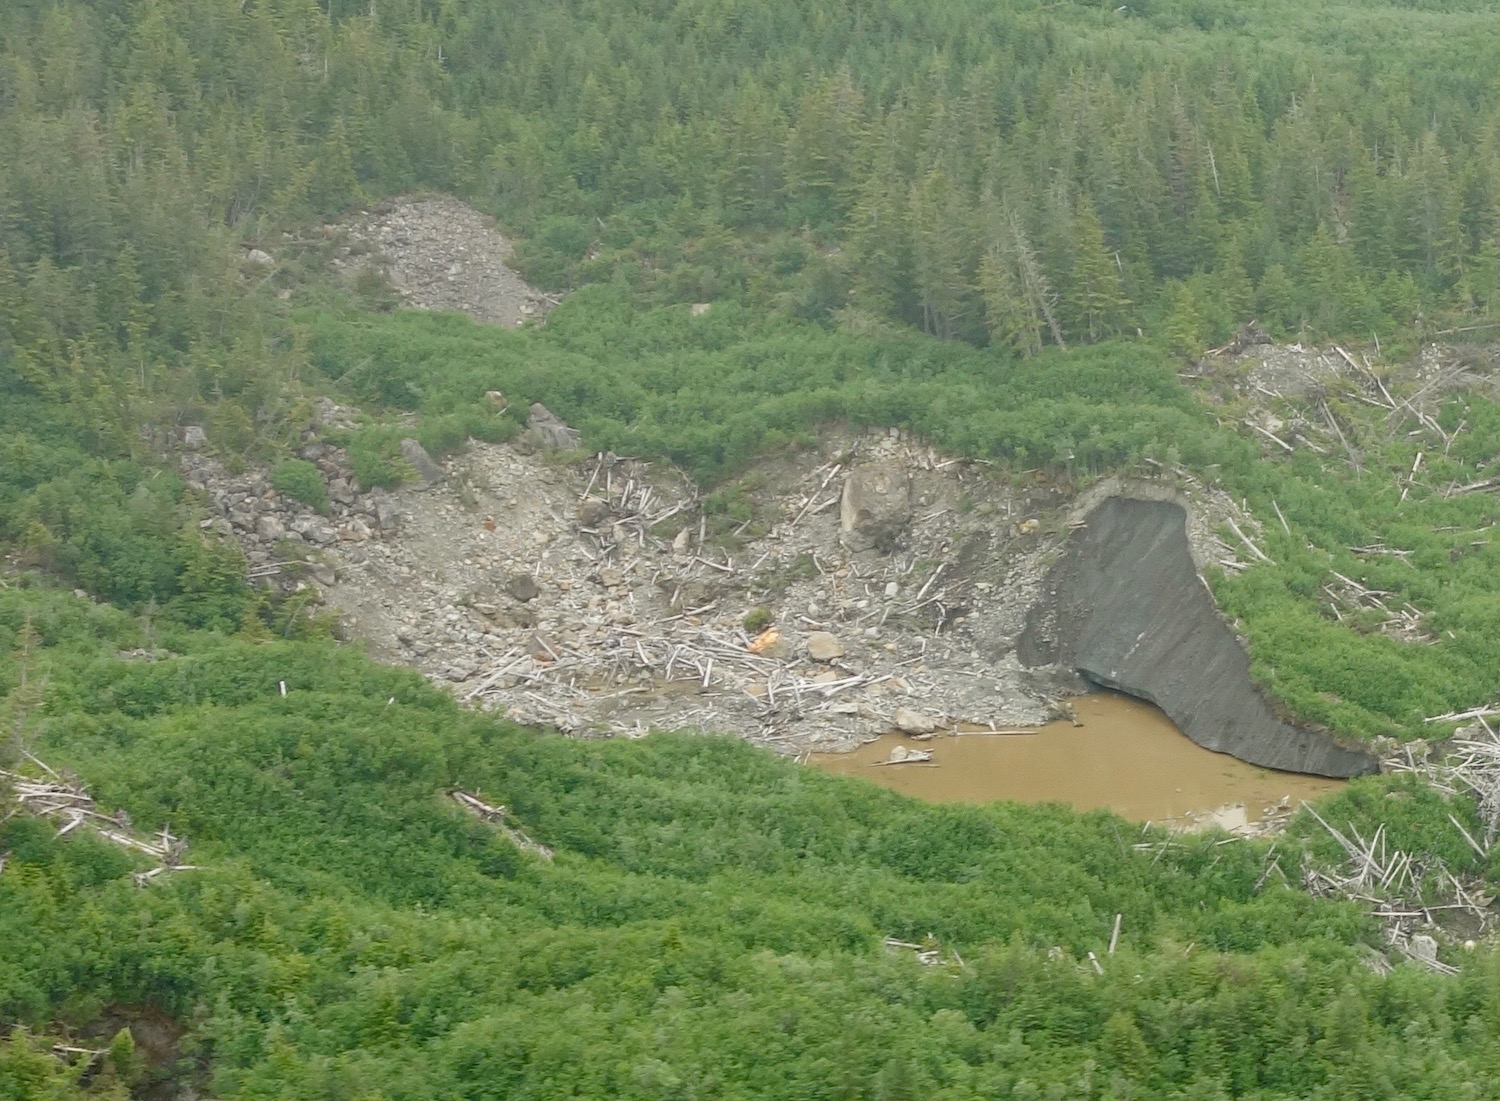 A hole in a glacier exposes gravel and ice, and lies surrounded by green deciduous and evergreen trees.